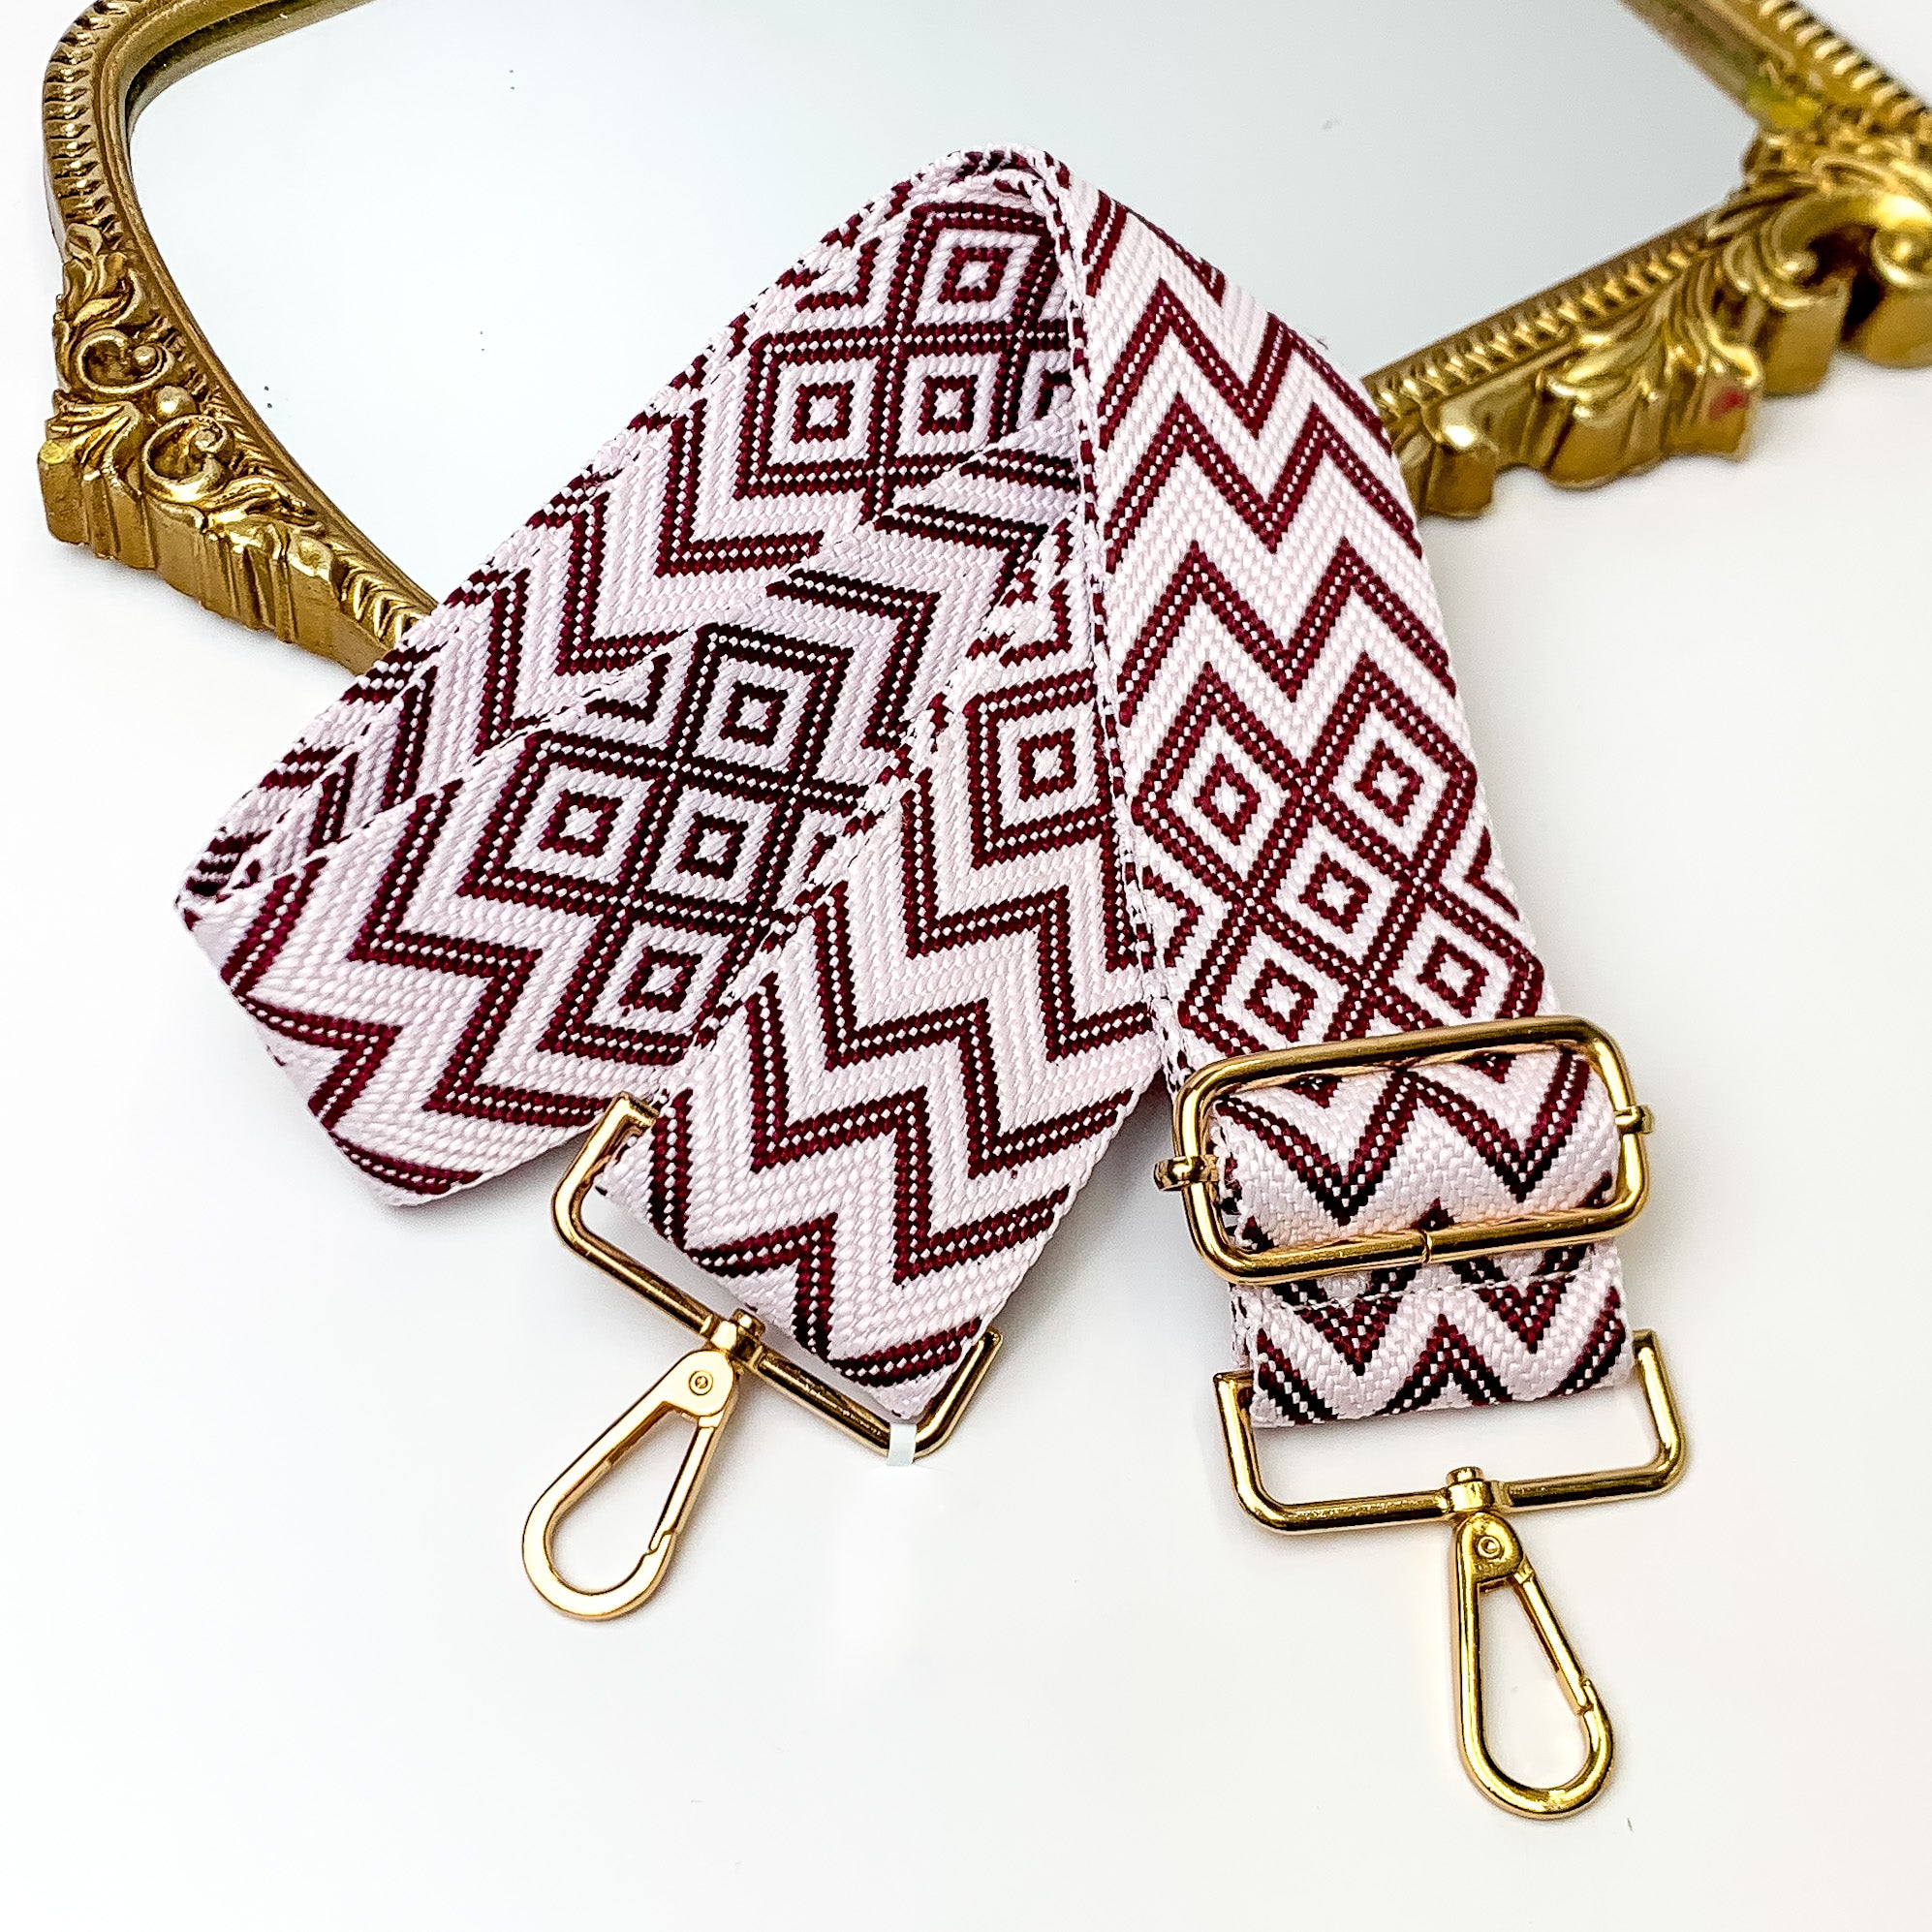 Light pink canvas purse strap with maroon chevron and diamond design. This purse strap includes gold accents. This purse strap is pictured partially on a gold mirror on a white background.